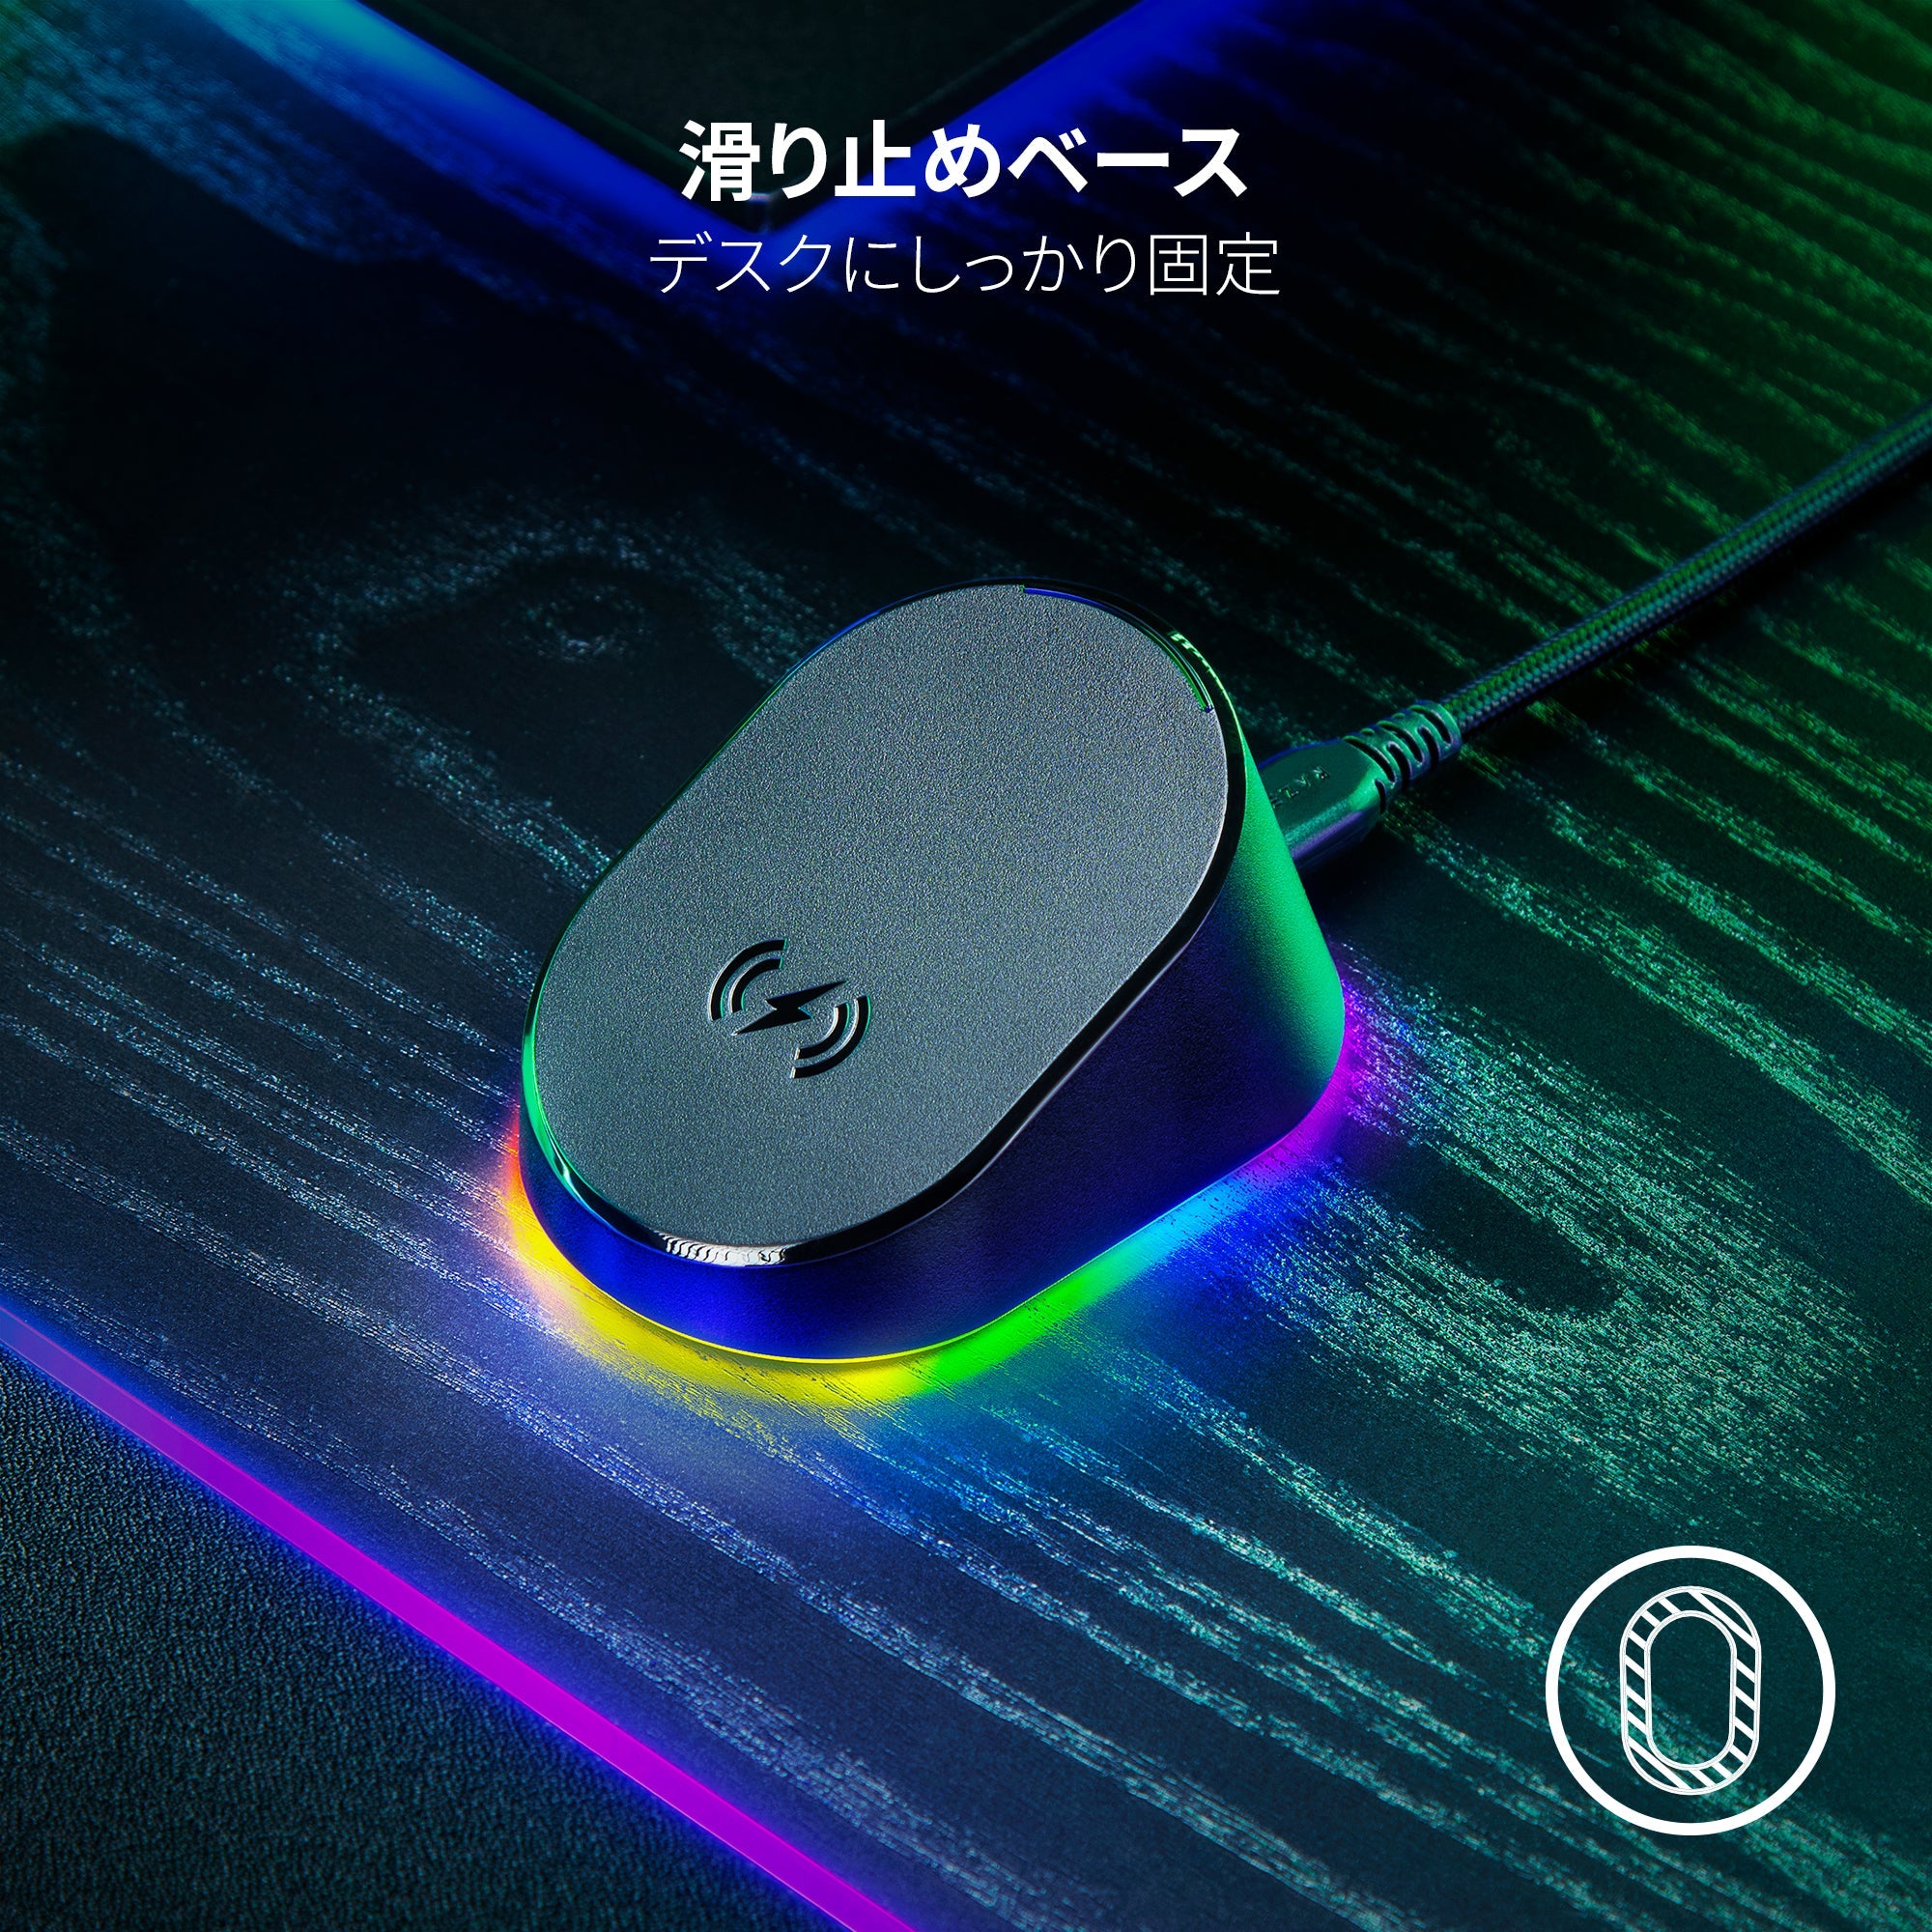 Razer Mouse Dock Pro マウスドック プロ | GRAPHT OFFICIAL STORE